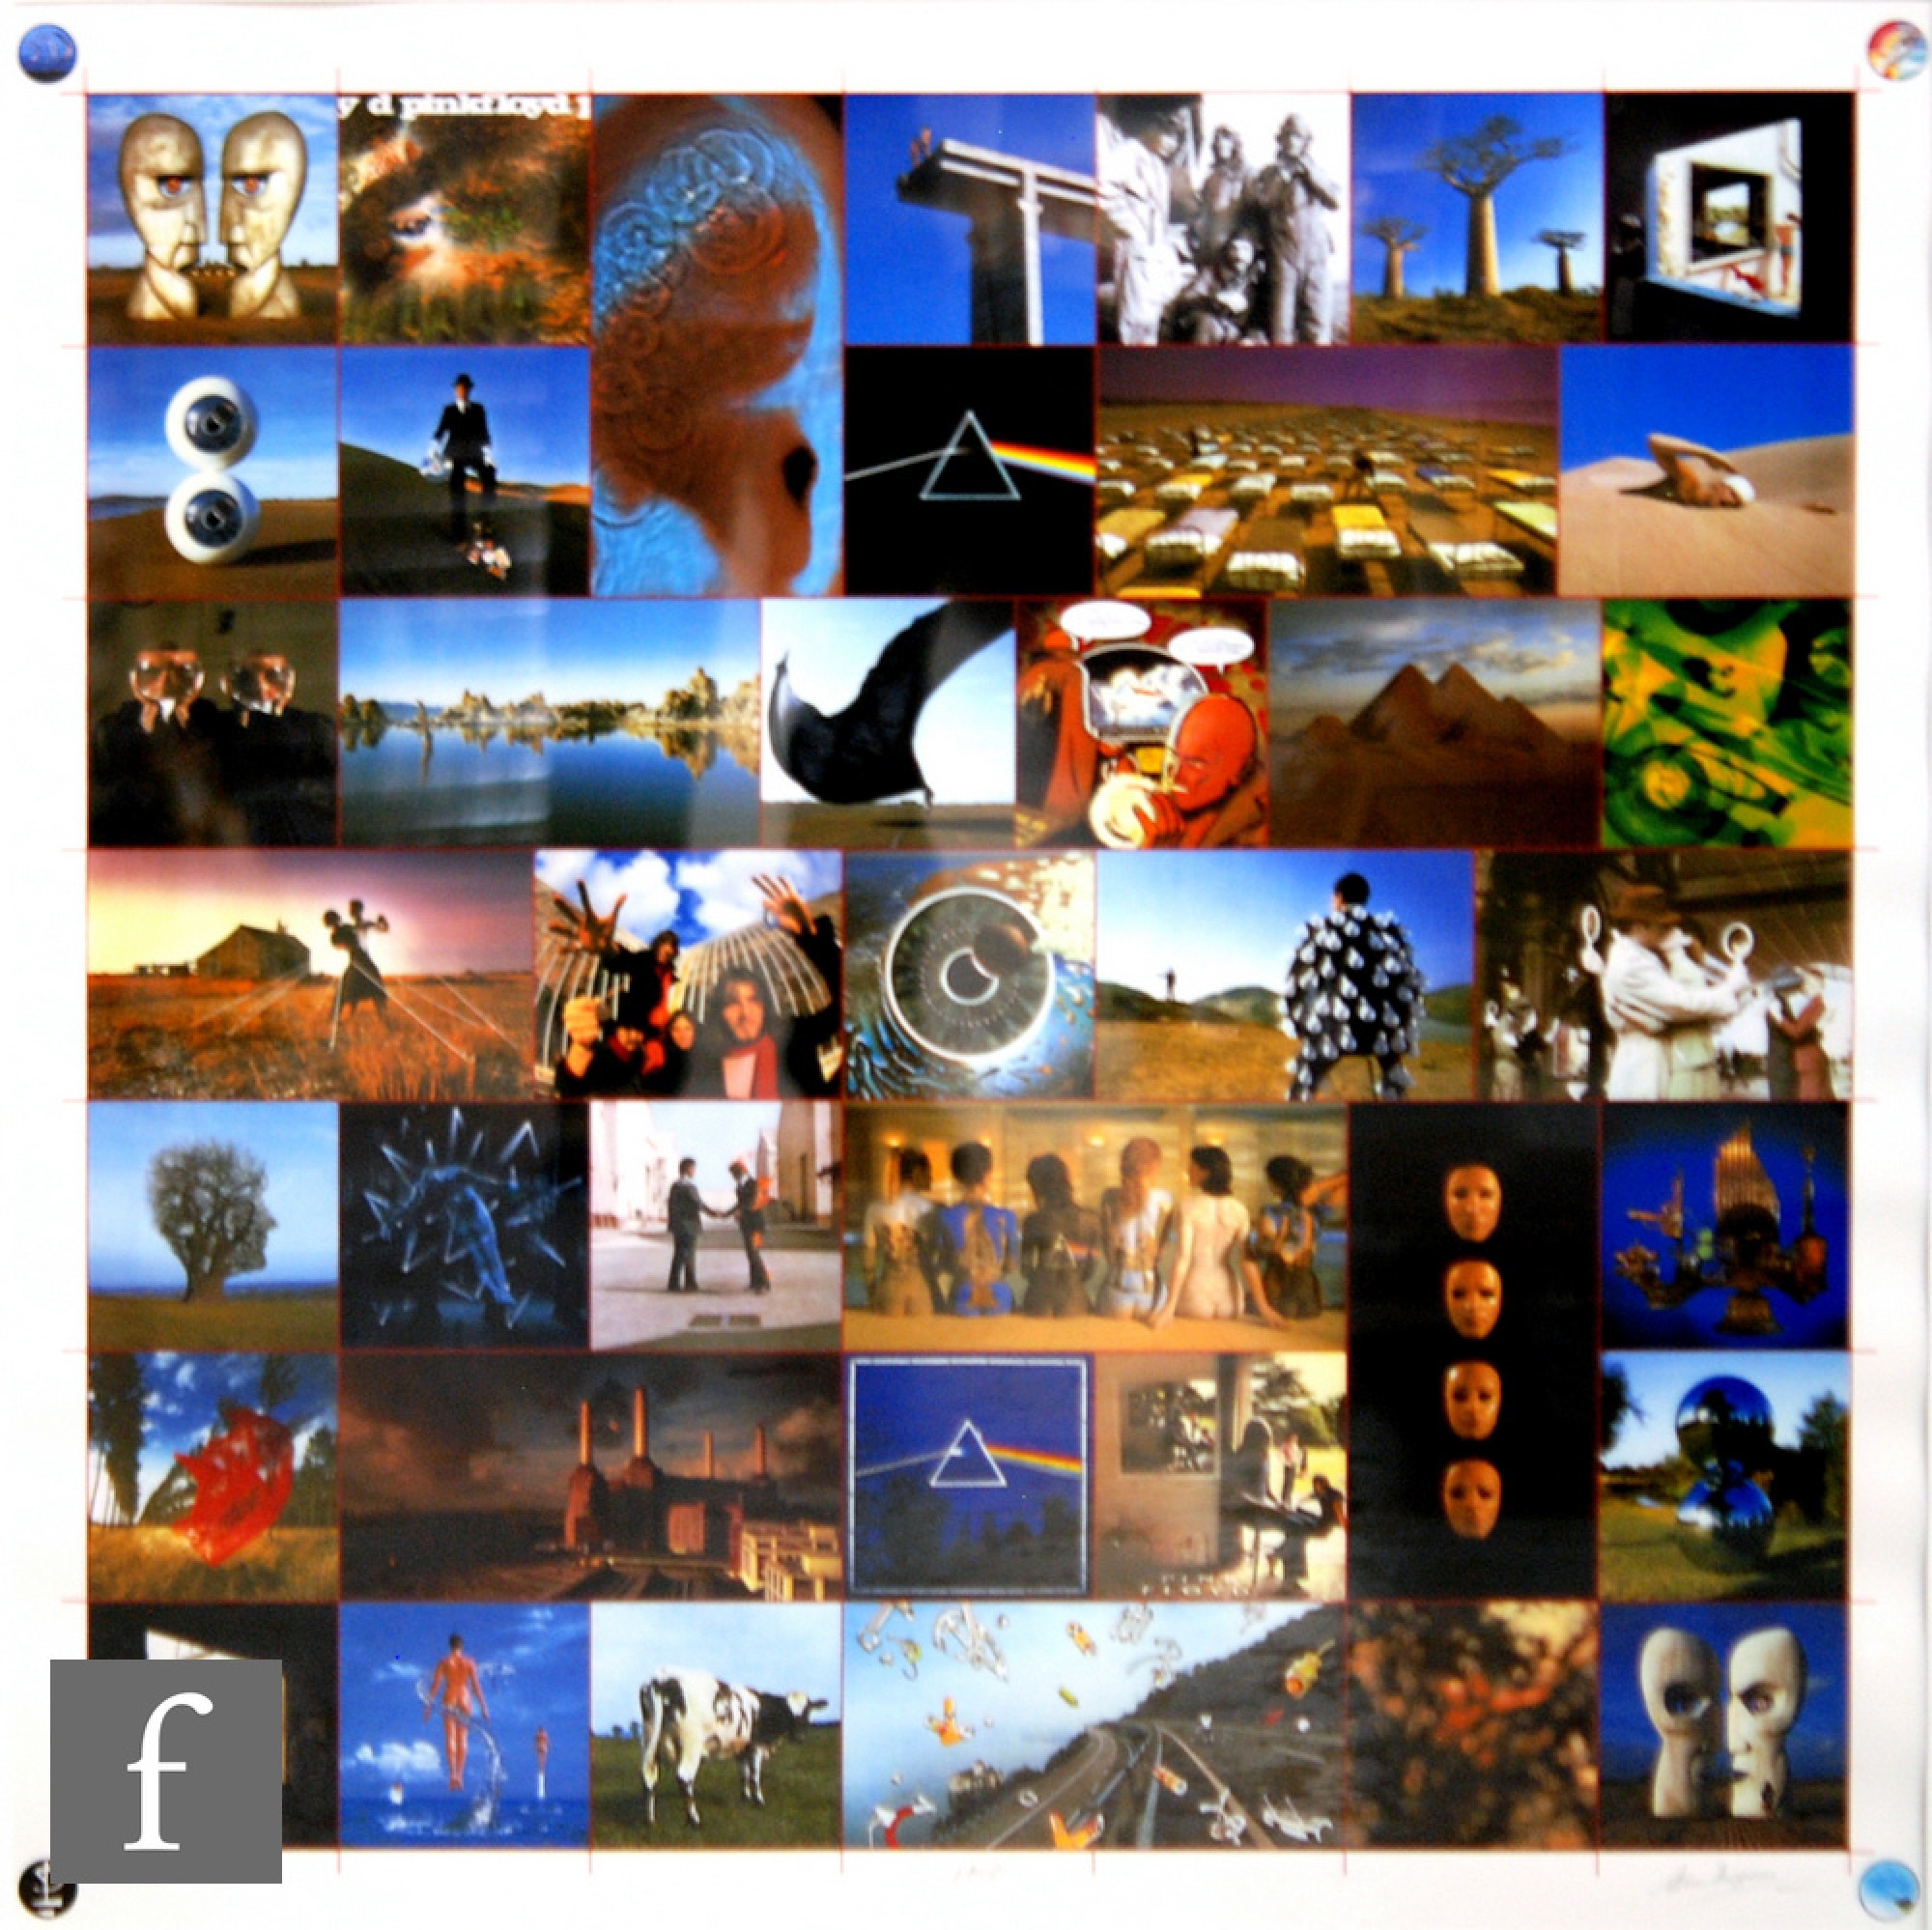 PF 40 by Storm Thorgerson